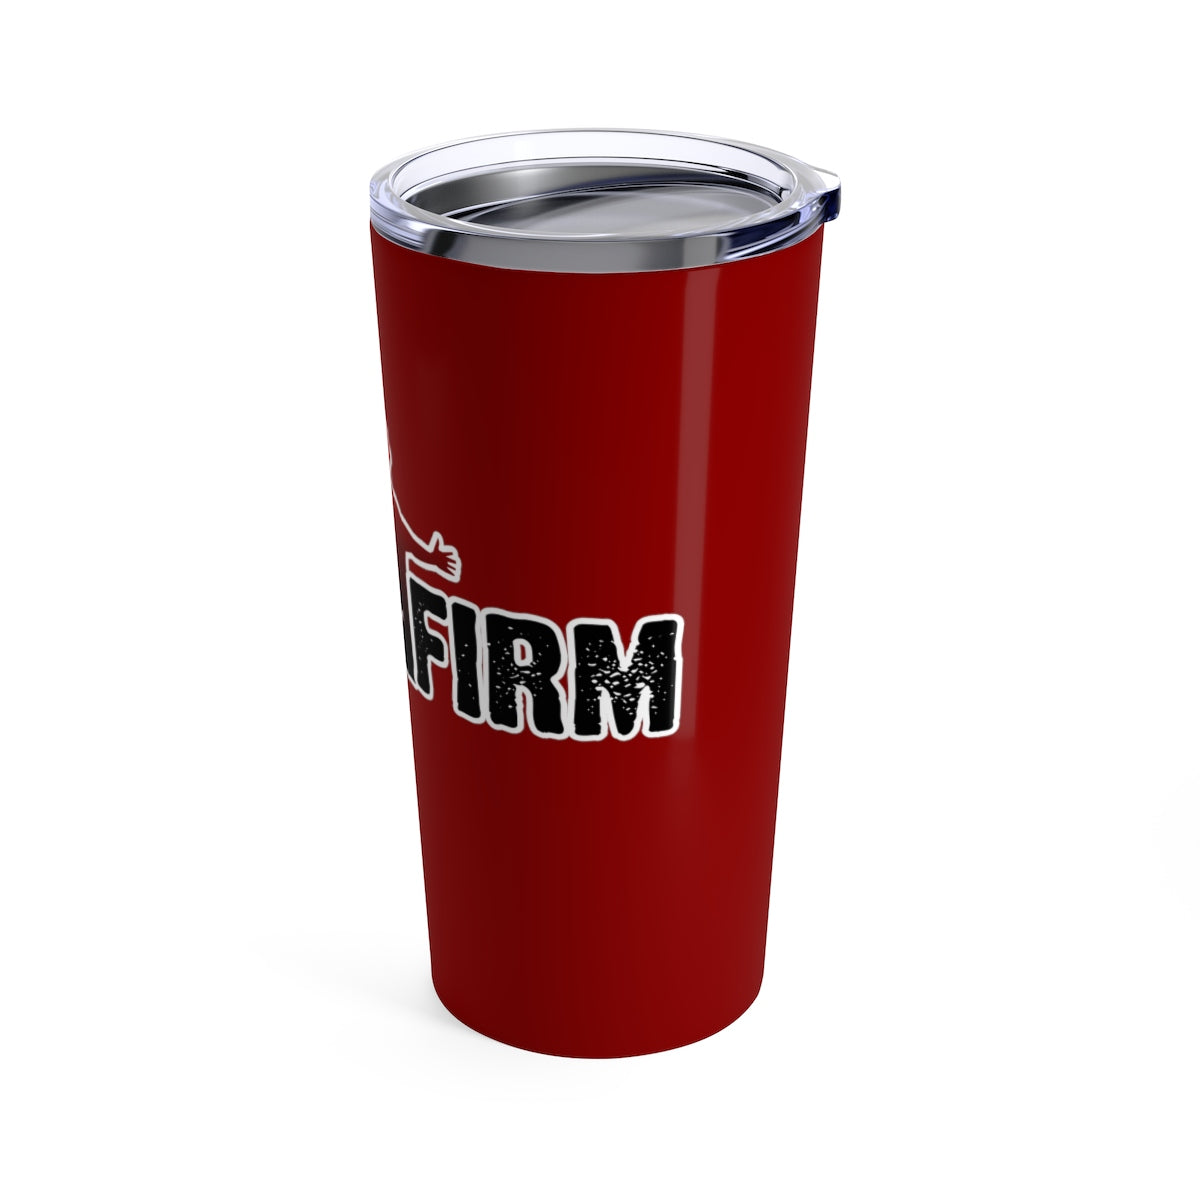 Stand Firm Tumbler (Red)